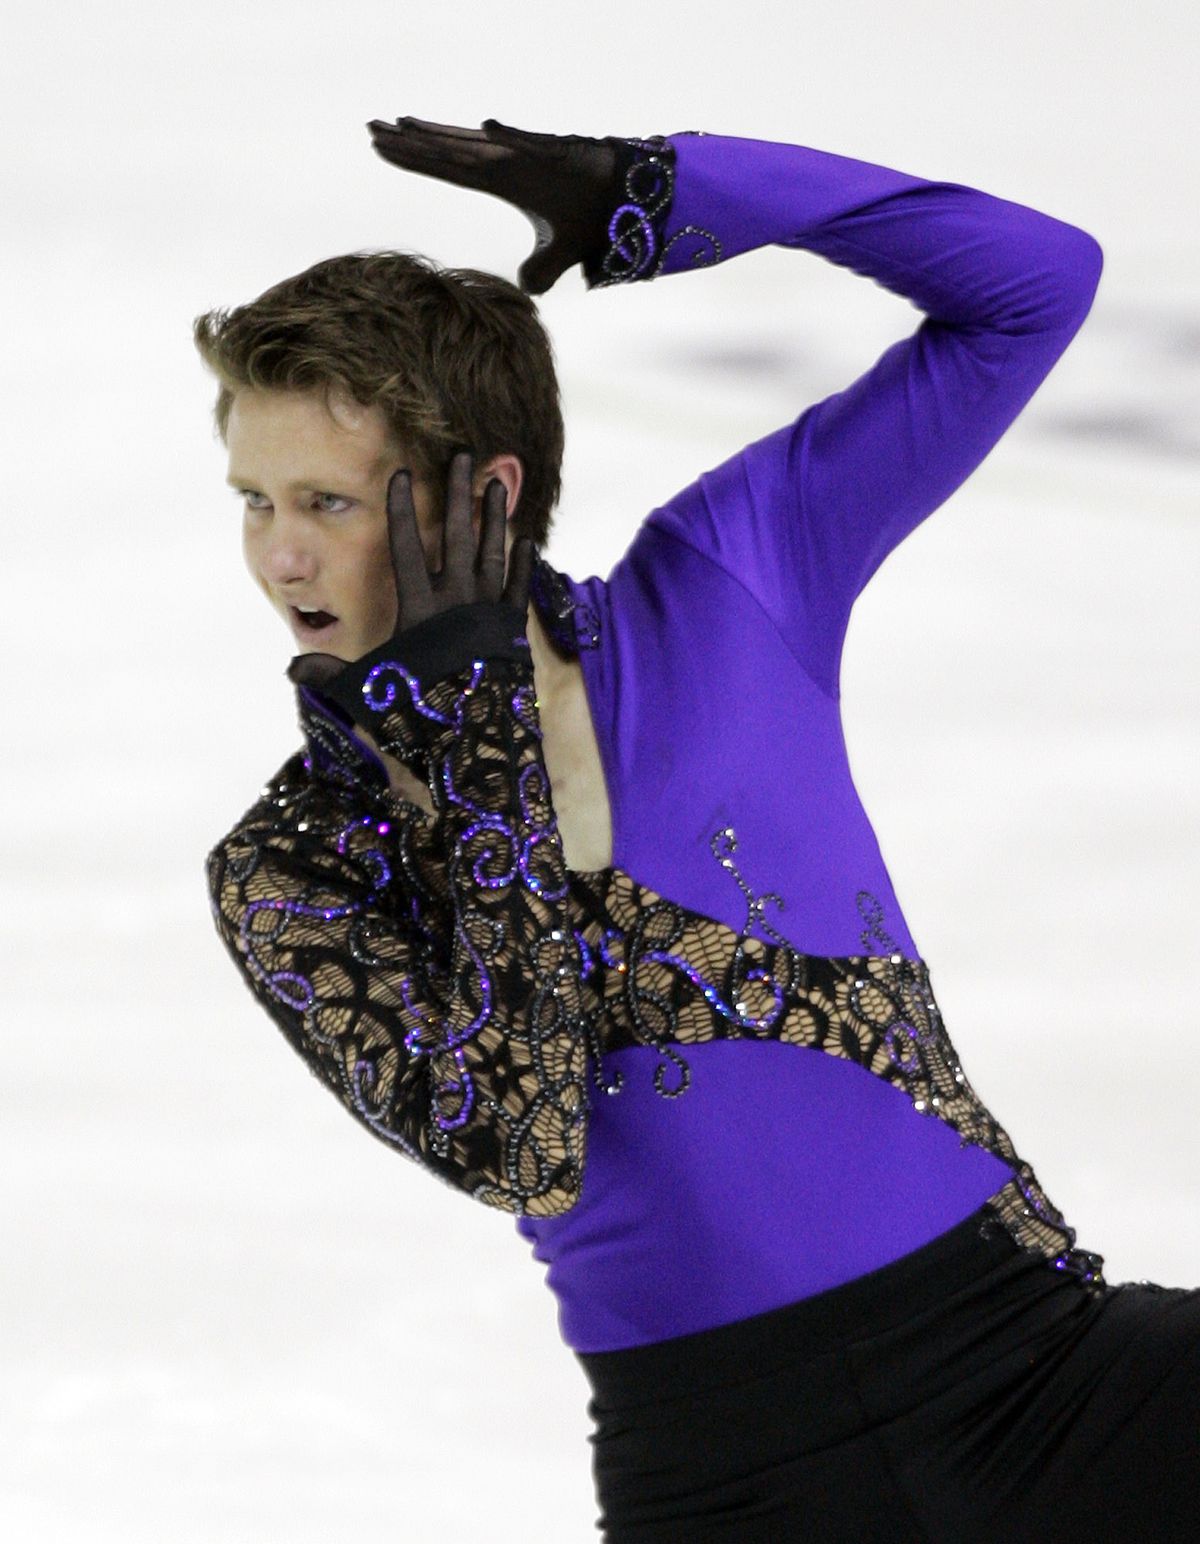 Jeremy Abbott finishes his men’s free skate Sunday in Cleveland en route to the U.S. title. (Associated Press / The Spokesman-Review)